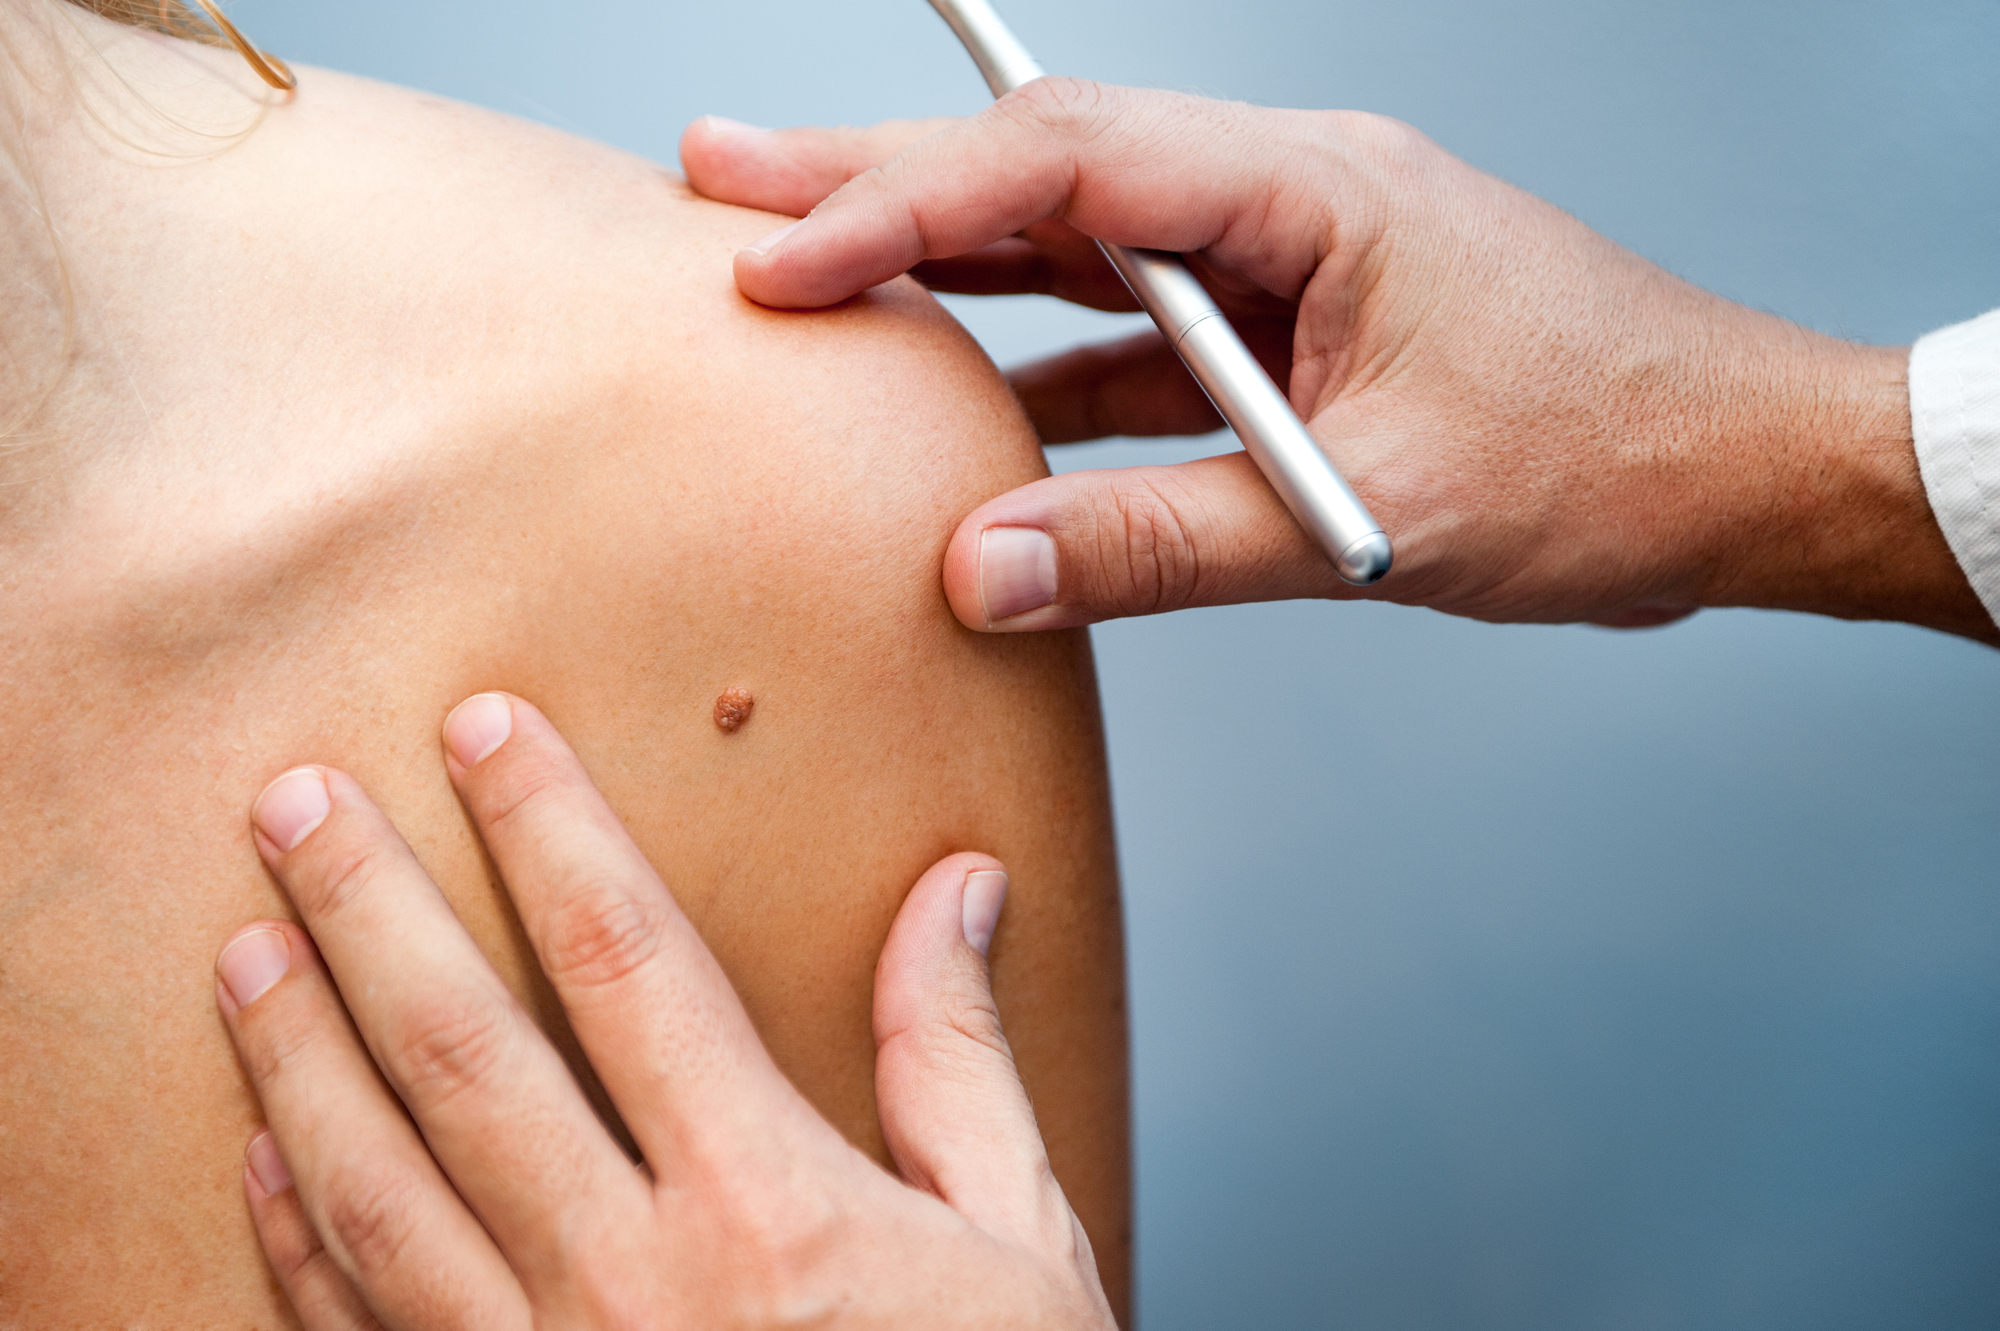 Checking yourself for melanomas? You might not be looking for the right thing.